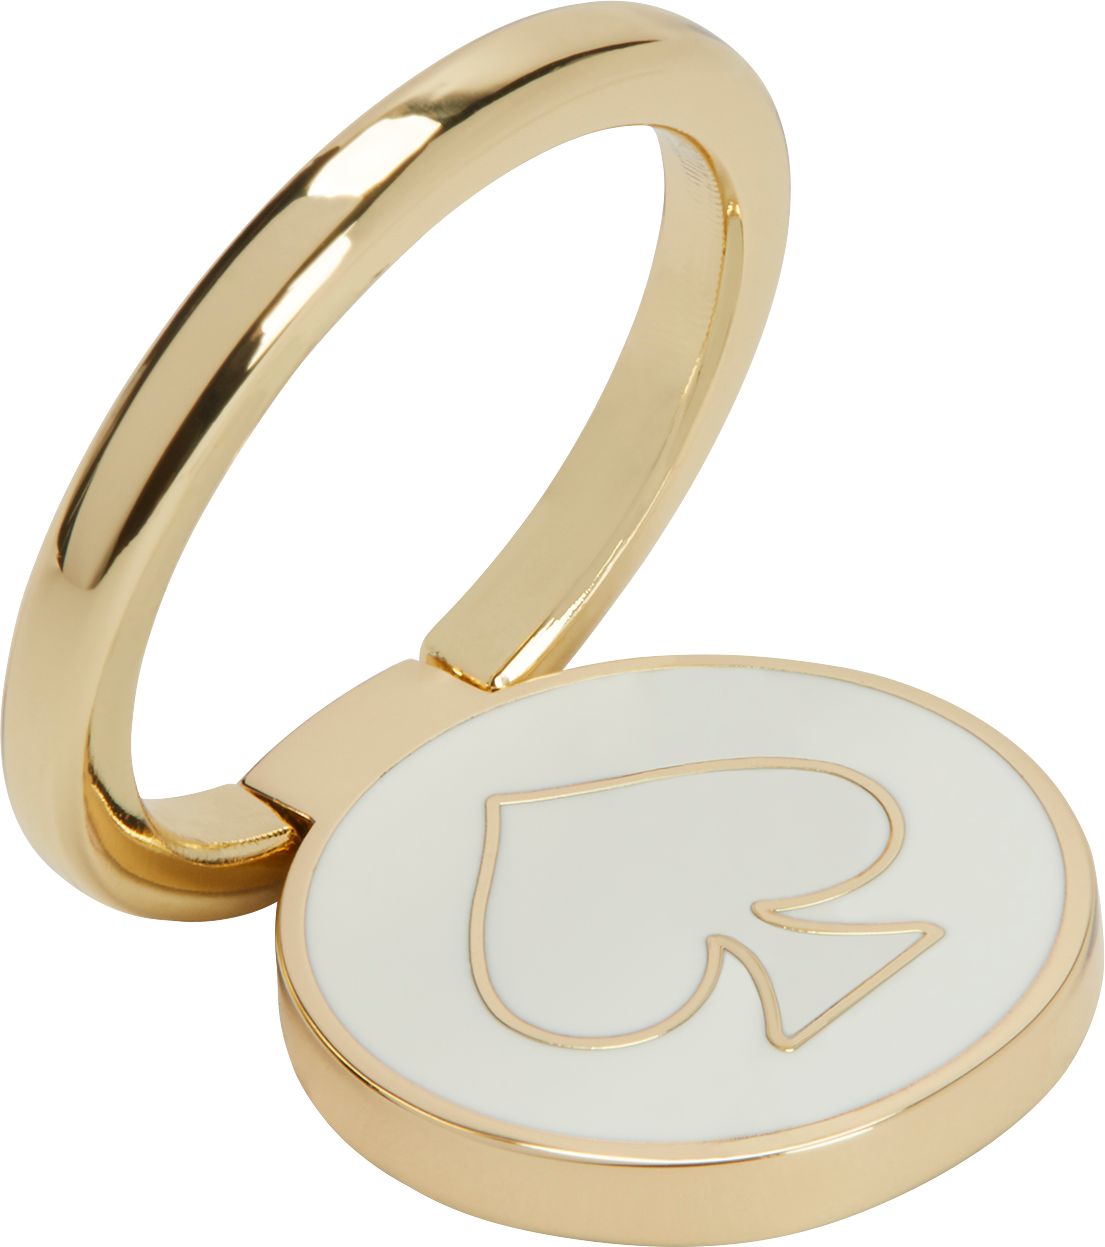 kate spade new york Universal Stability Ring Gold/Cream